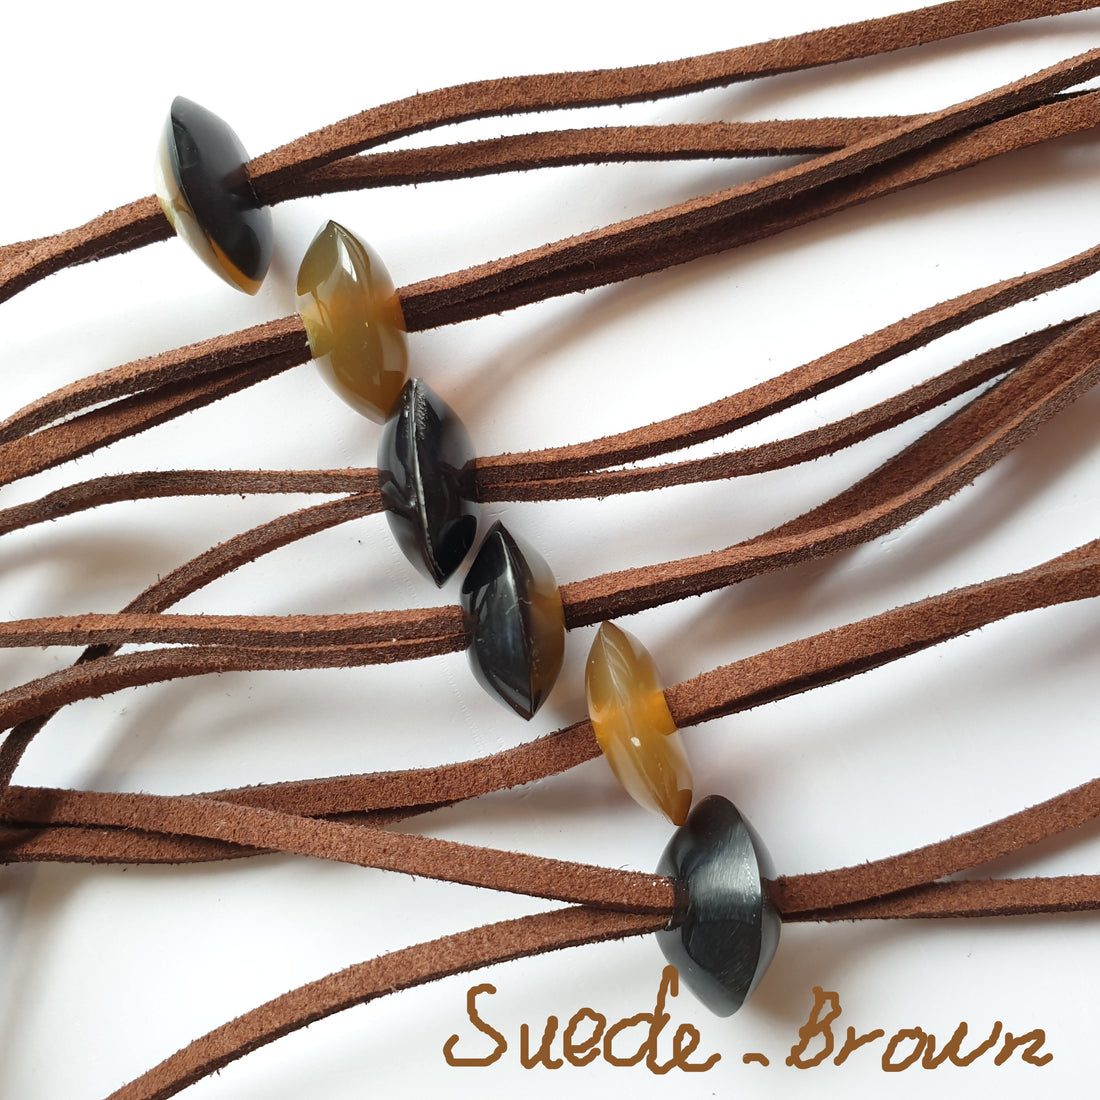 Suede-Brown cords with small natural buffalo horn pieces on the light background, impressive gift for her